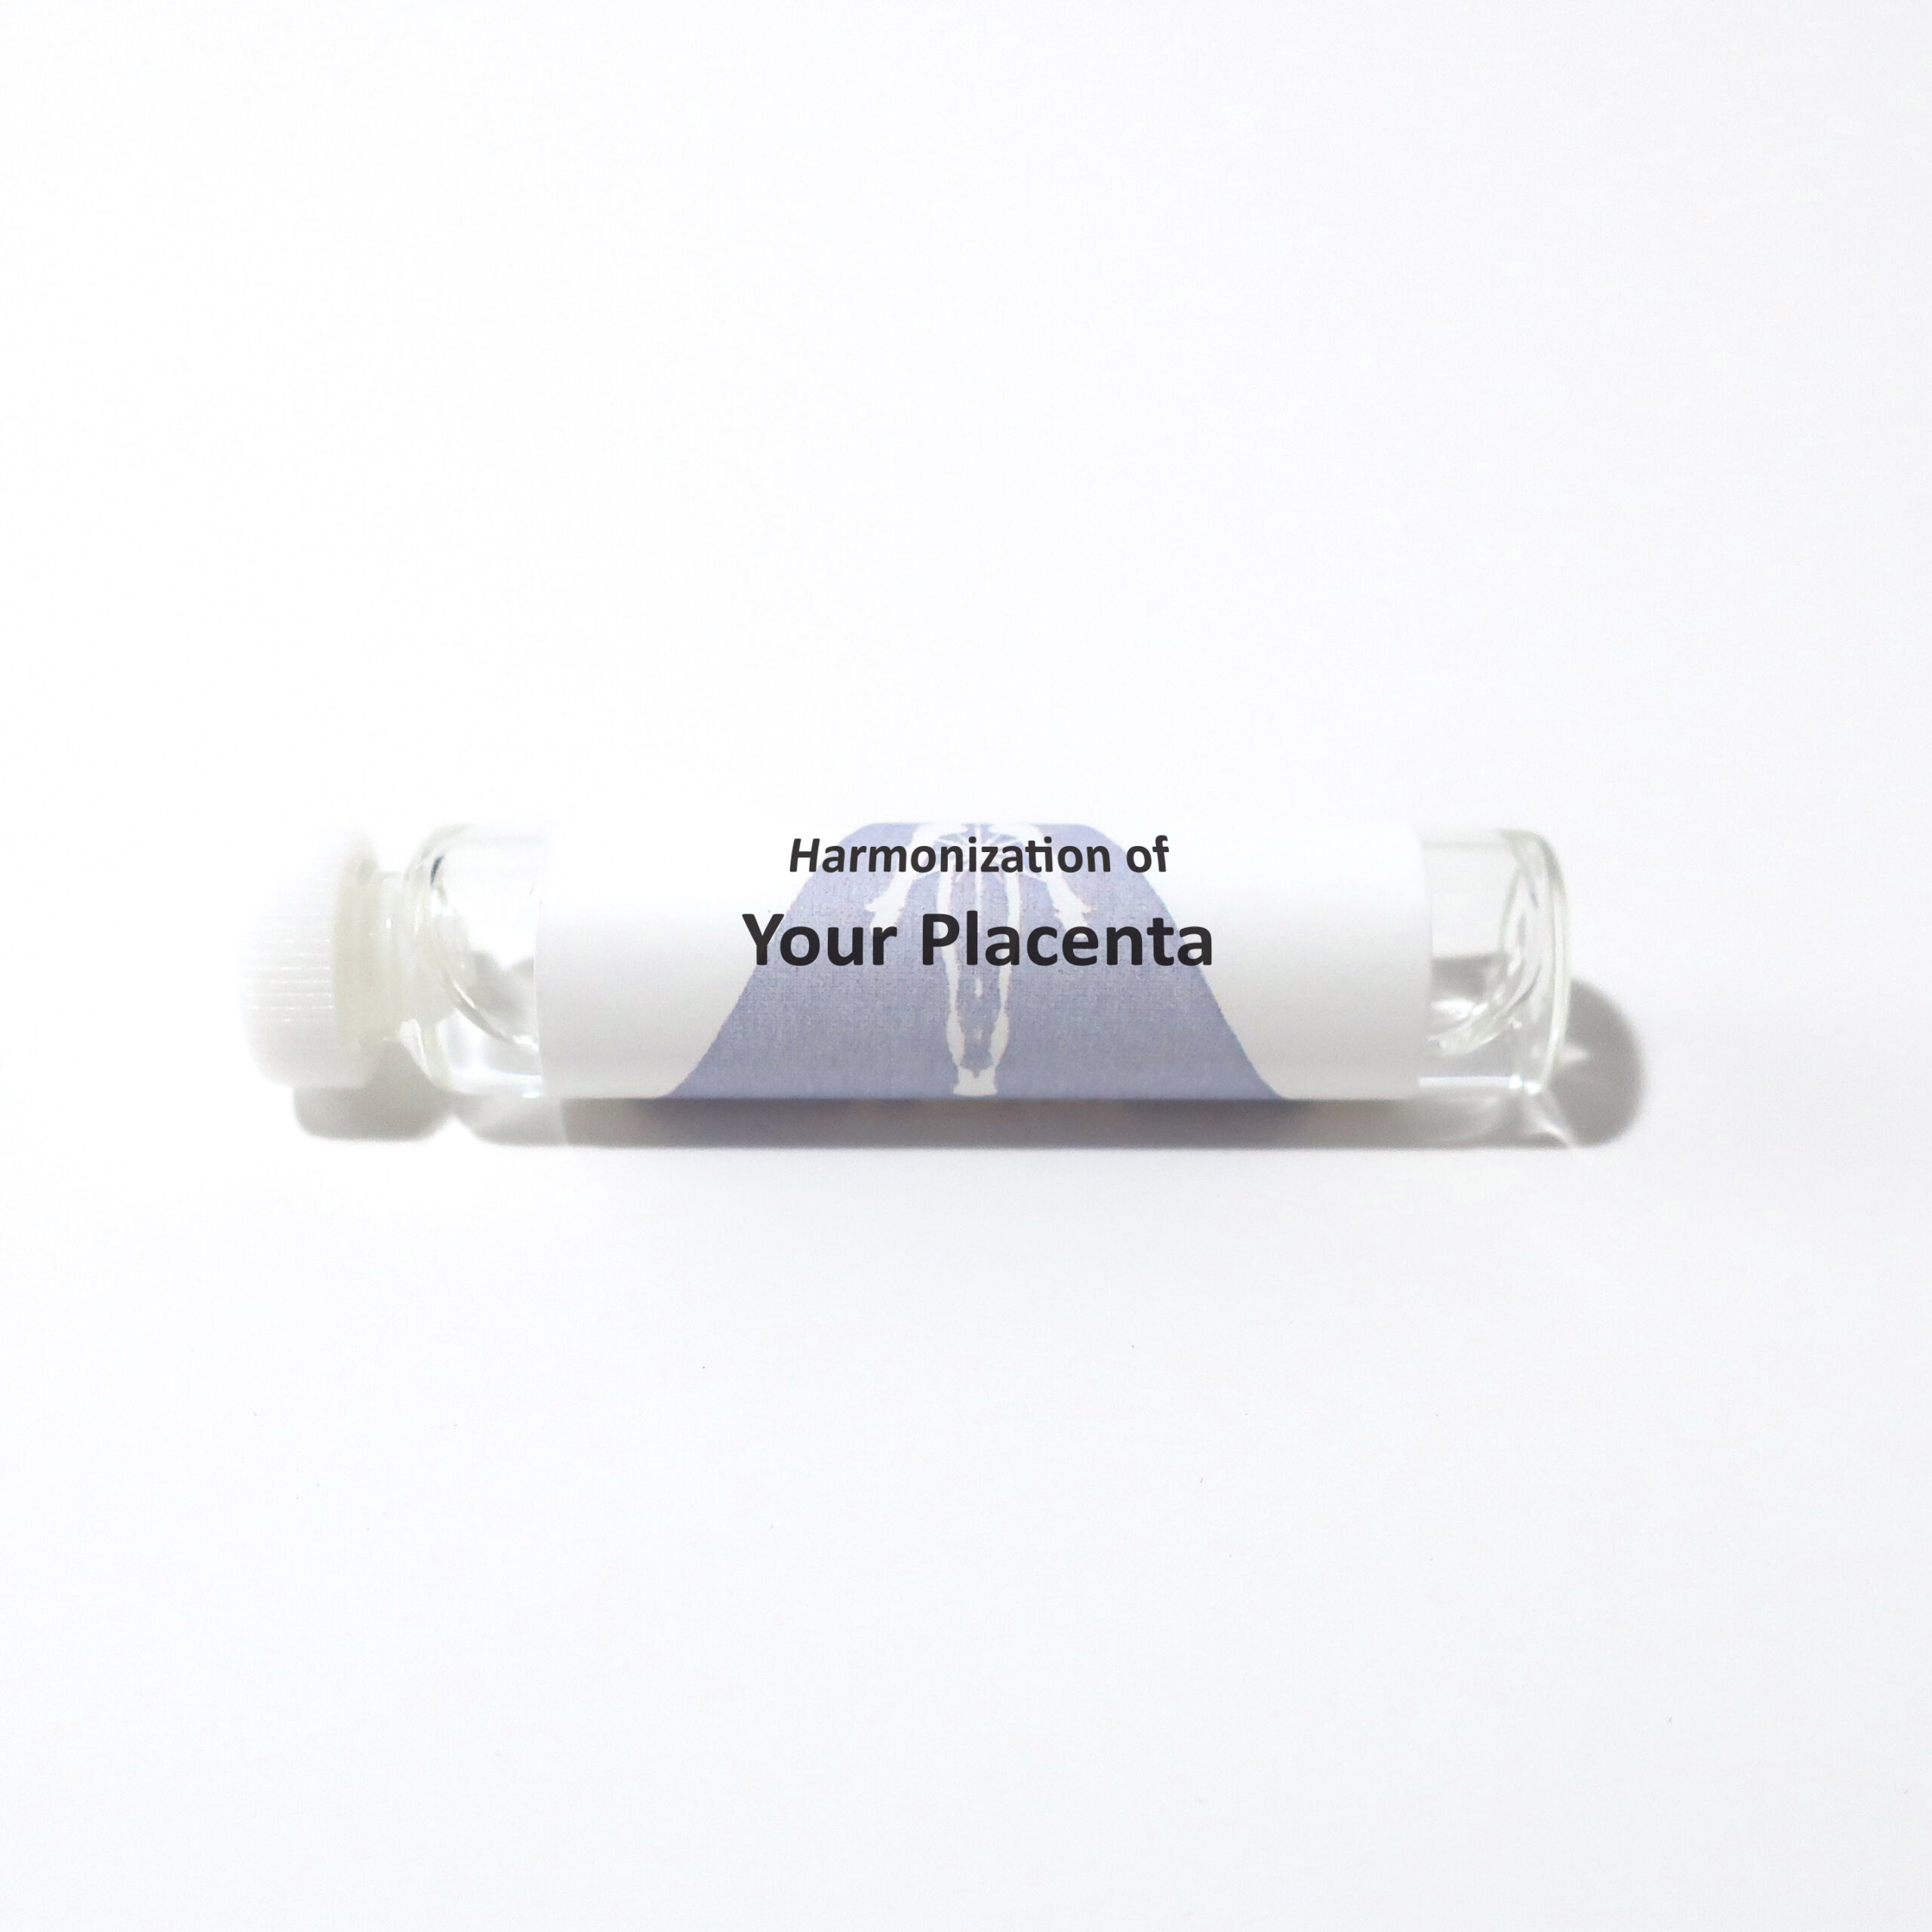 Your Placenta